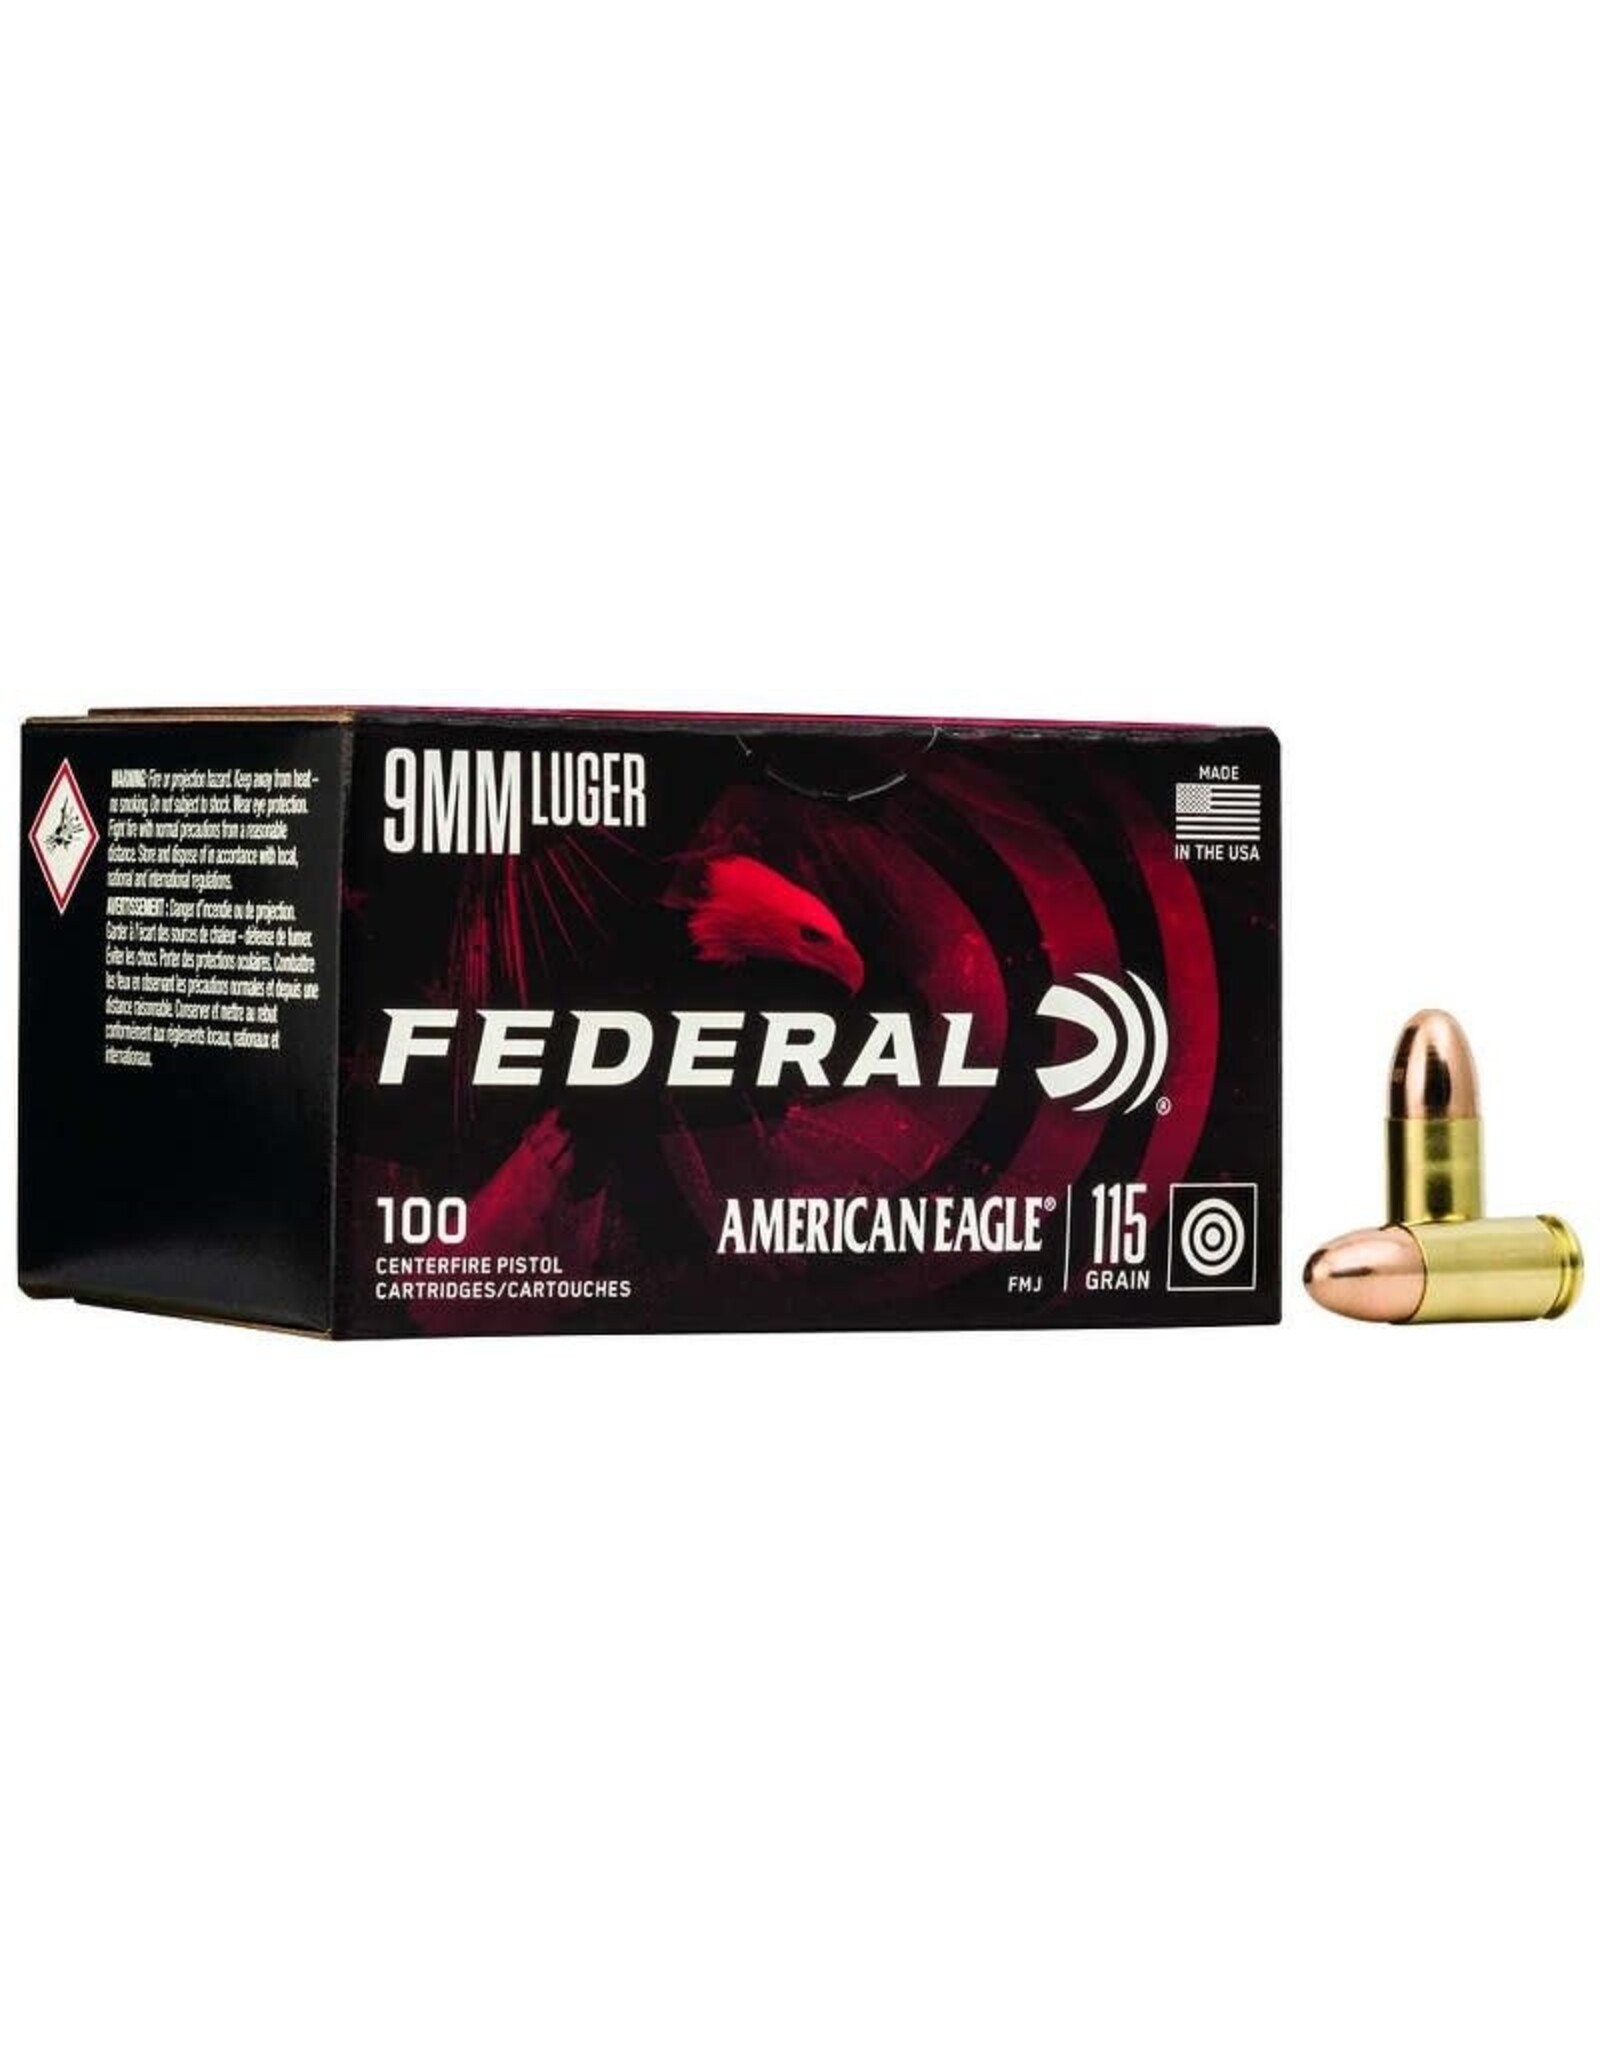 Federal Federal 9mm 115 Gr FMJ - 100 Count